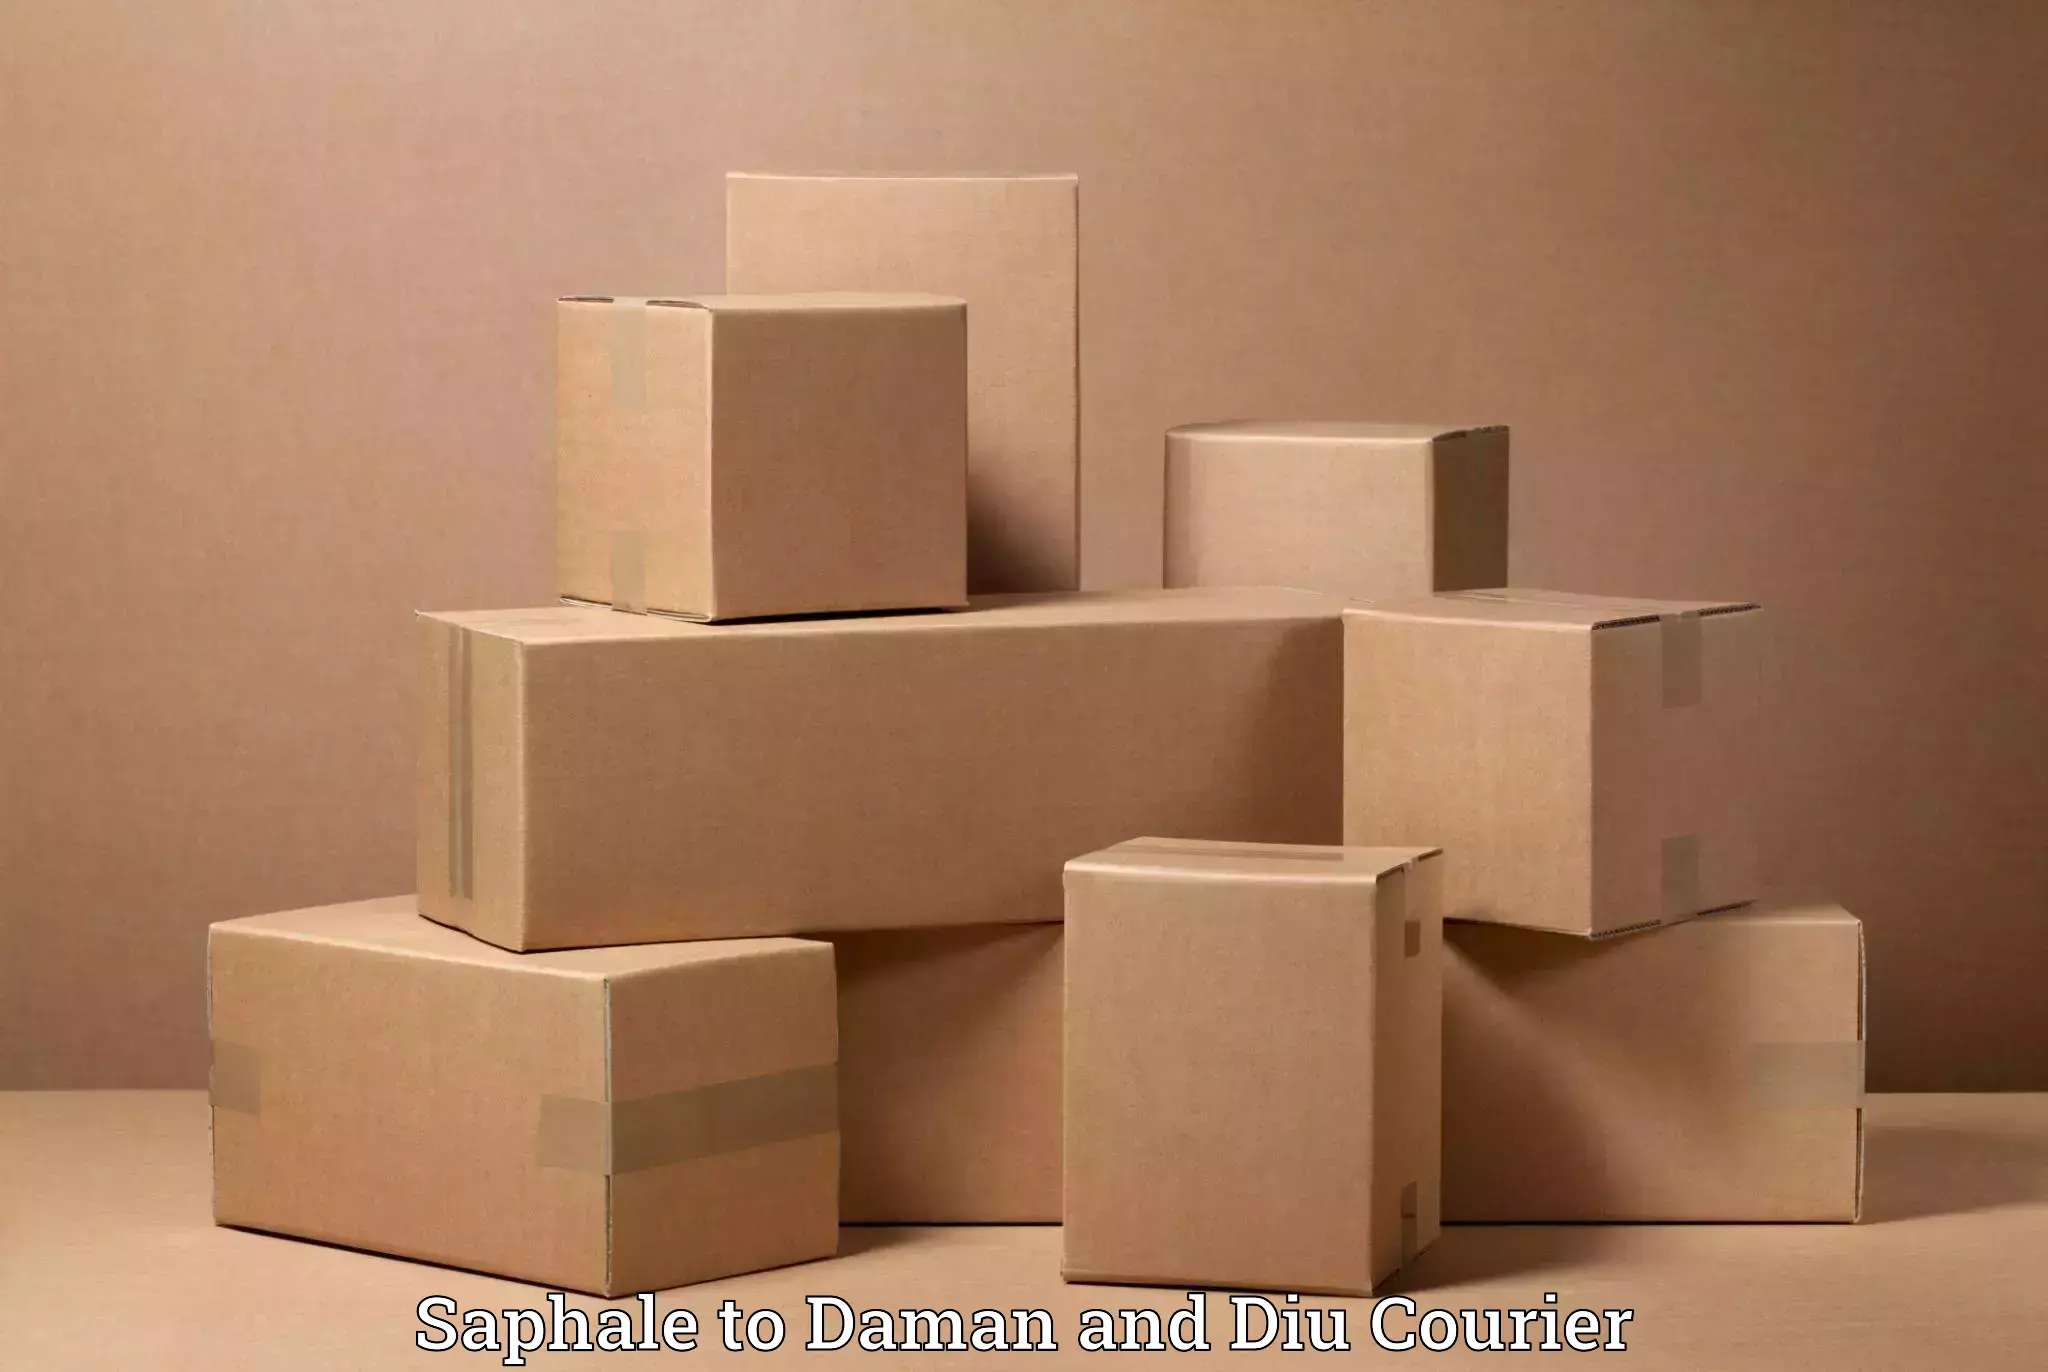 Efficient moving strategies in Saphale to Daman